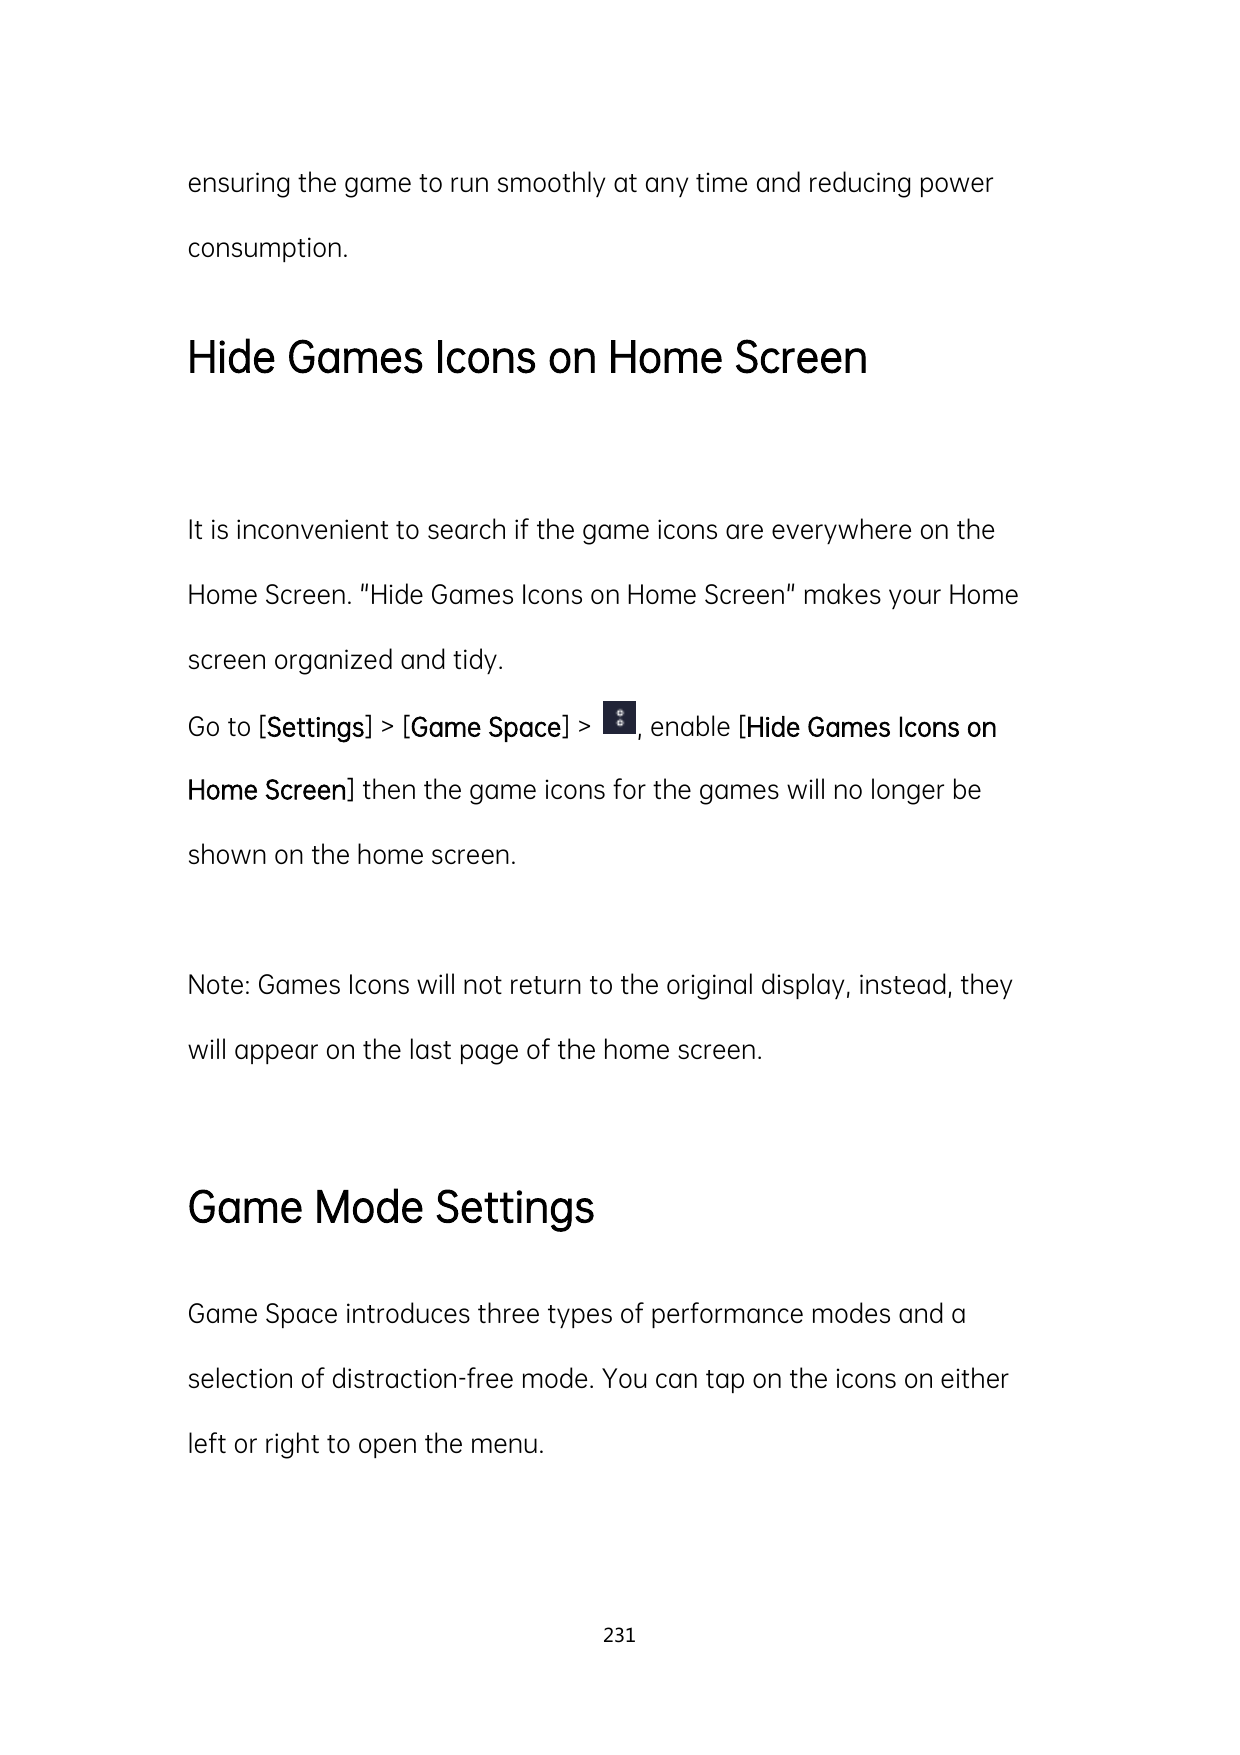 ensuring the game to run smoothly at any time and reducing powerconsumption.Hide Games Icons on Home ScreenIt is inconvenient to